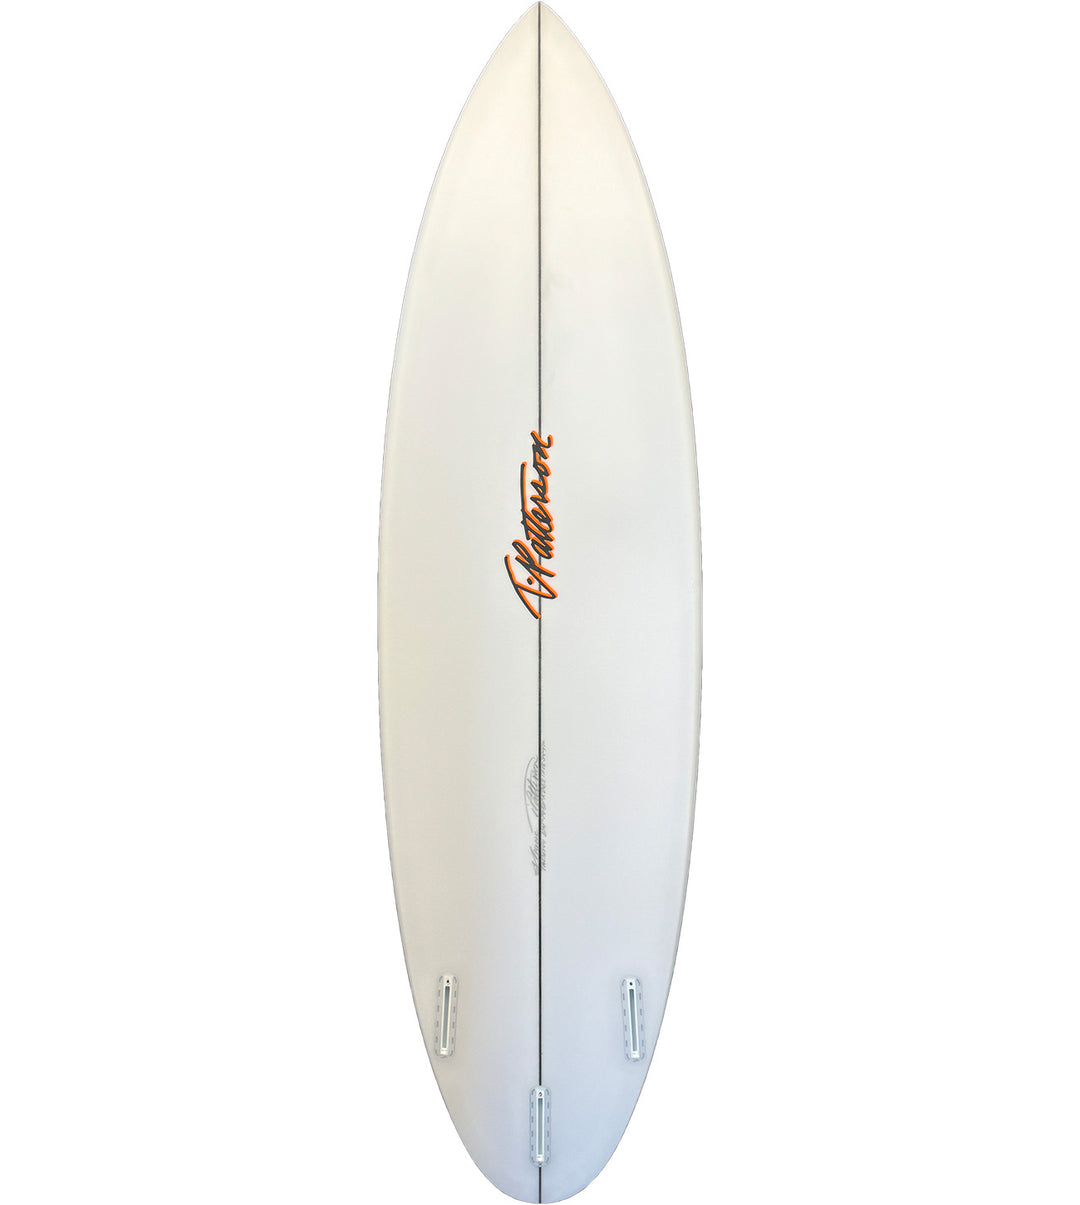 TPatterson Surfboard
IF15/Futures 6'4 #TPS231344